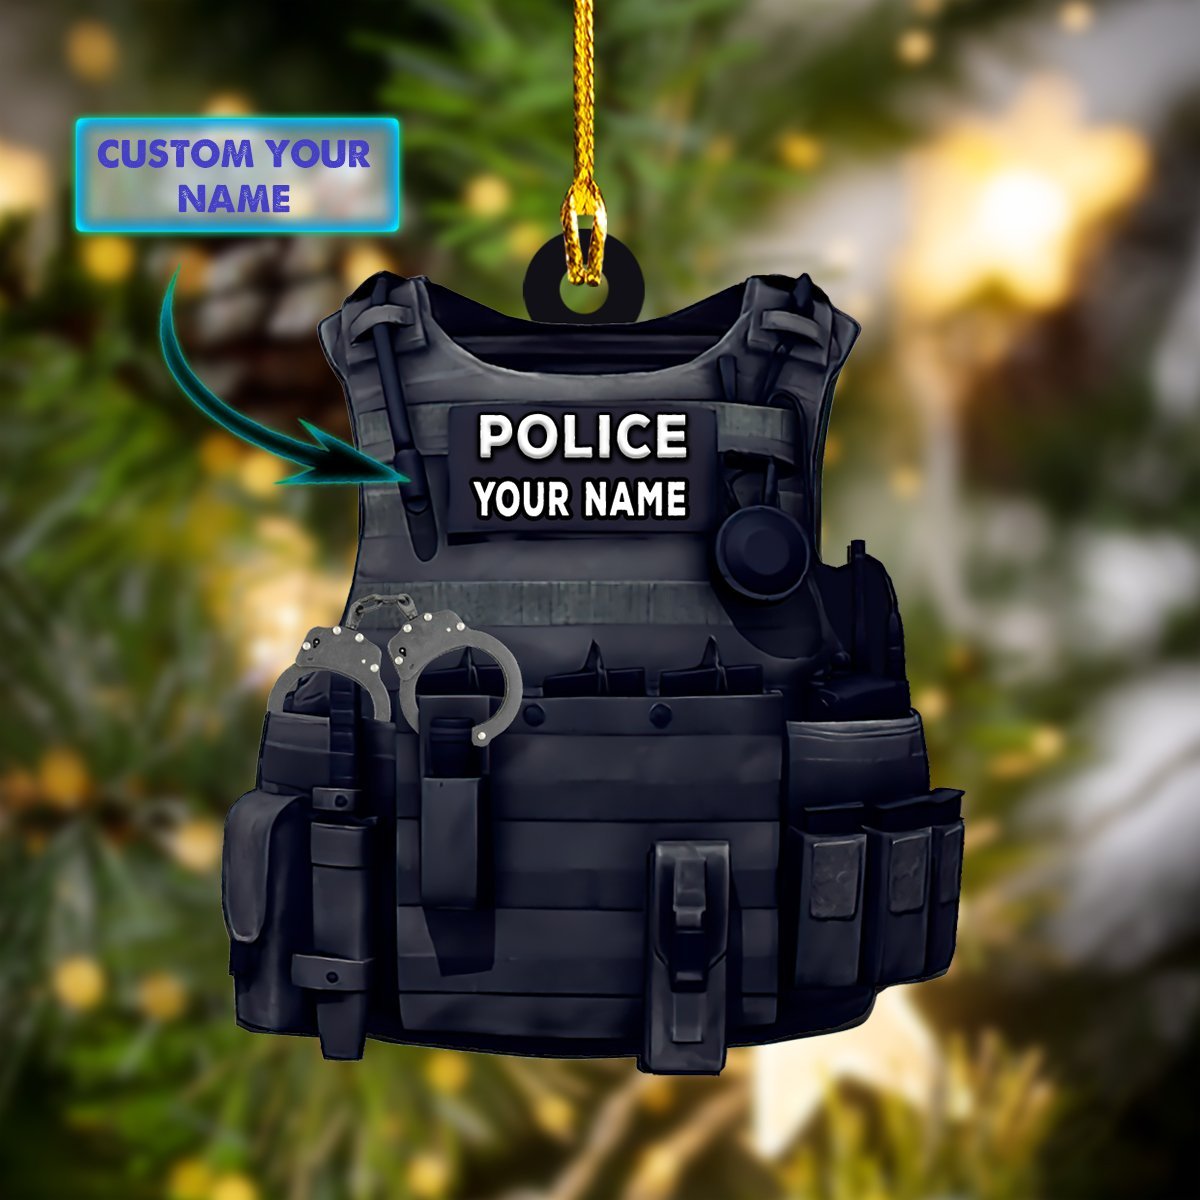 Police Vest - Personalized Police Officer Ornament (Printed On Both Sides) 1022